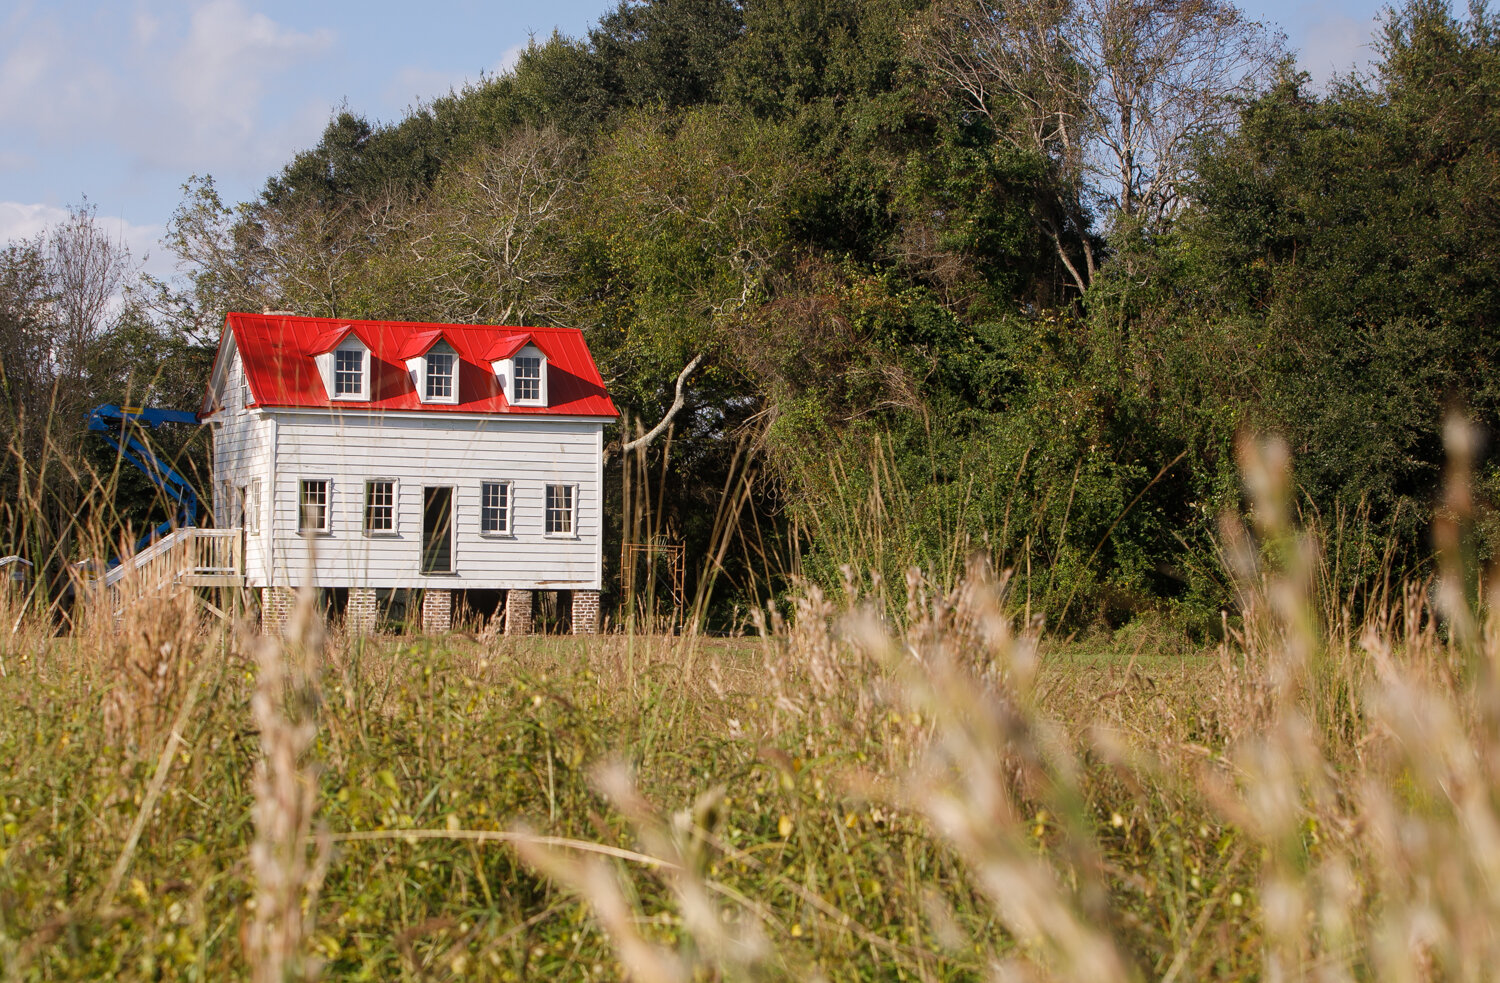   The Hutchinson House is one of the oldest surviving houses built by African Americans during the Reconstruction Era on Edisto Island, South Carolina. Working closely with Henry Hutchinson’s living ancestors, along with Artis Construction, the Edist